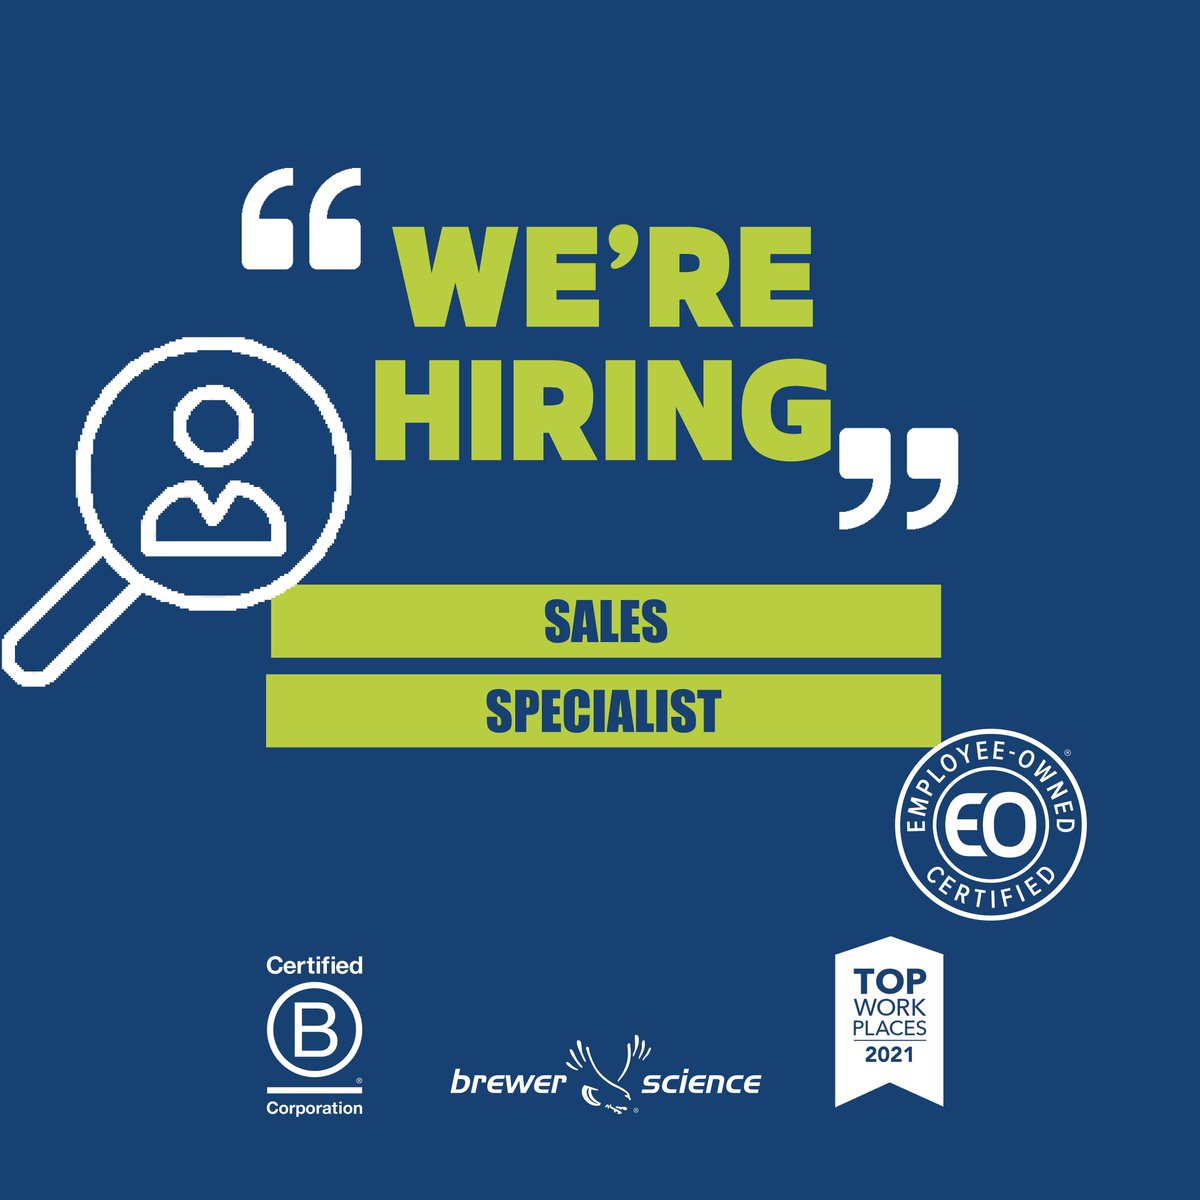 test Twitter Media - Brewer Science is looking for a Sales Specialist to join our team in Rolla, MO. Learn more about the position and other current job openings by visiting : https://t.co/4e0AMaMY4y
Brewer Science is proud to be @certified_eo and Certified B Corporation (@bcorpuscan) https://t.co/qt9LtS03NV